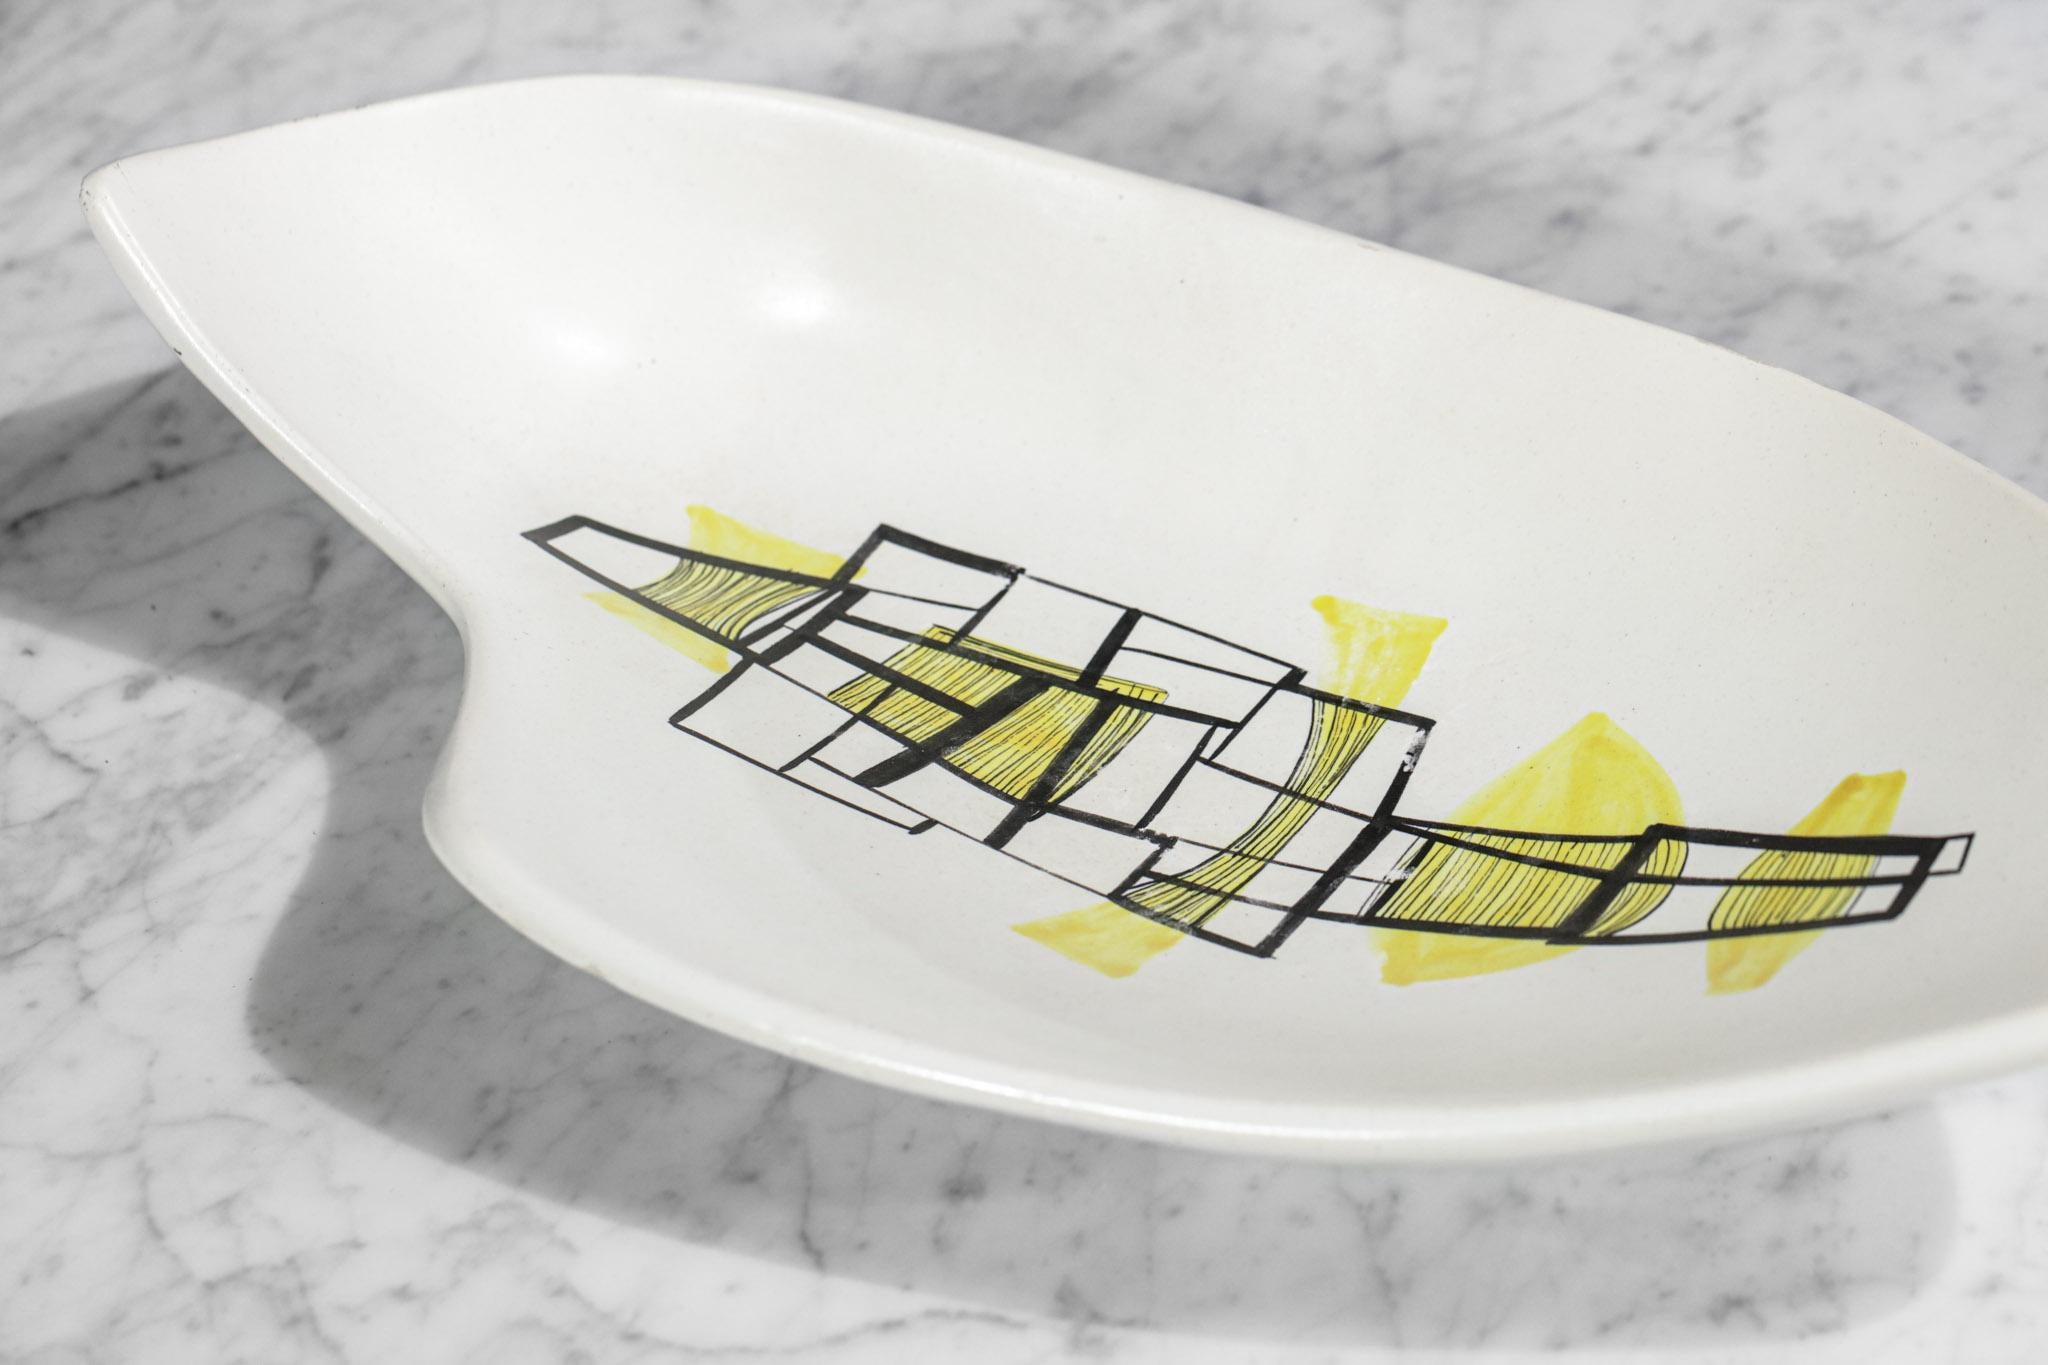 Painted Large Ceramic Bowl by the French Ceramist Roger Capron from the 60s